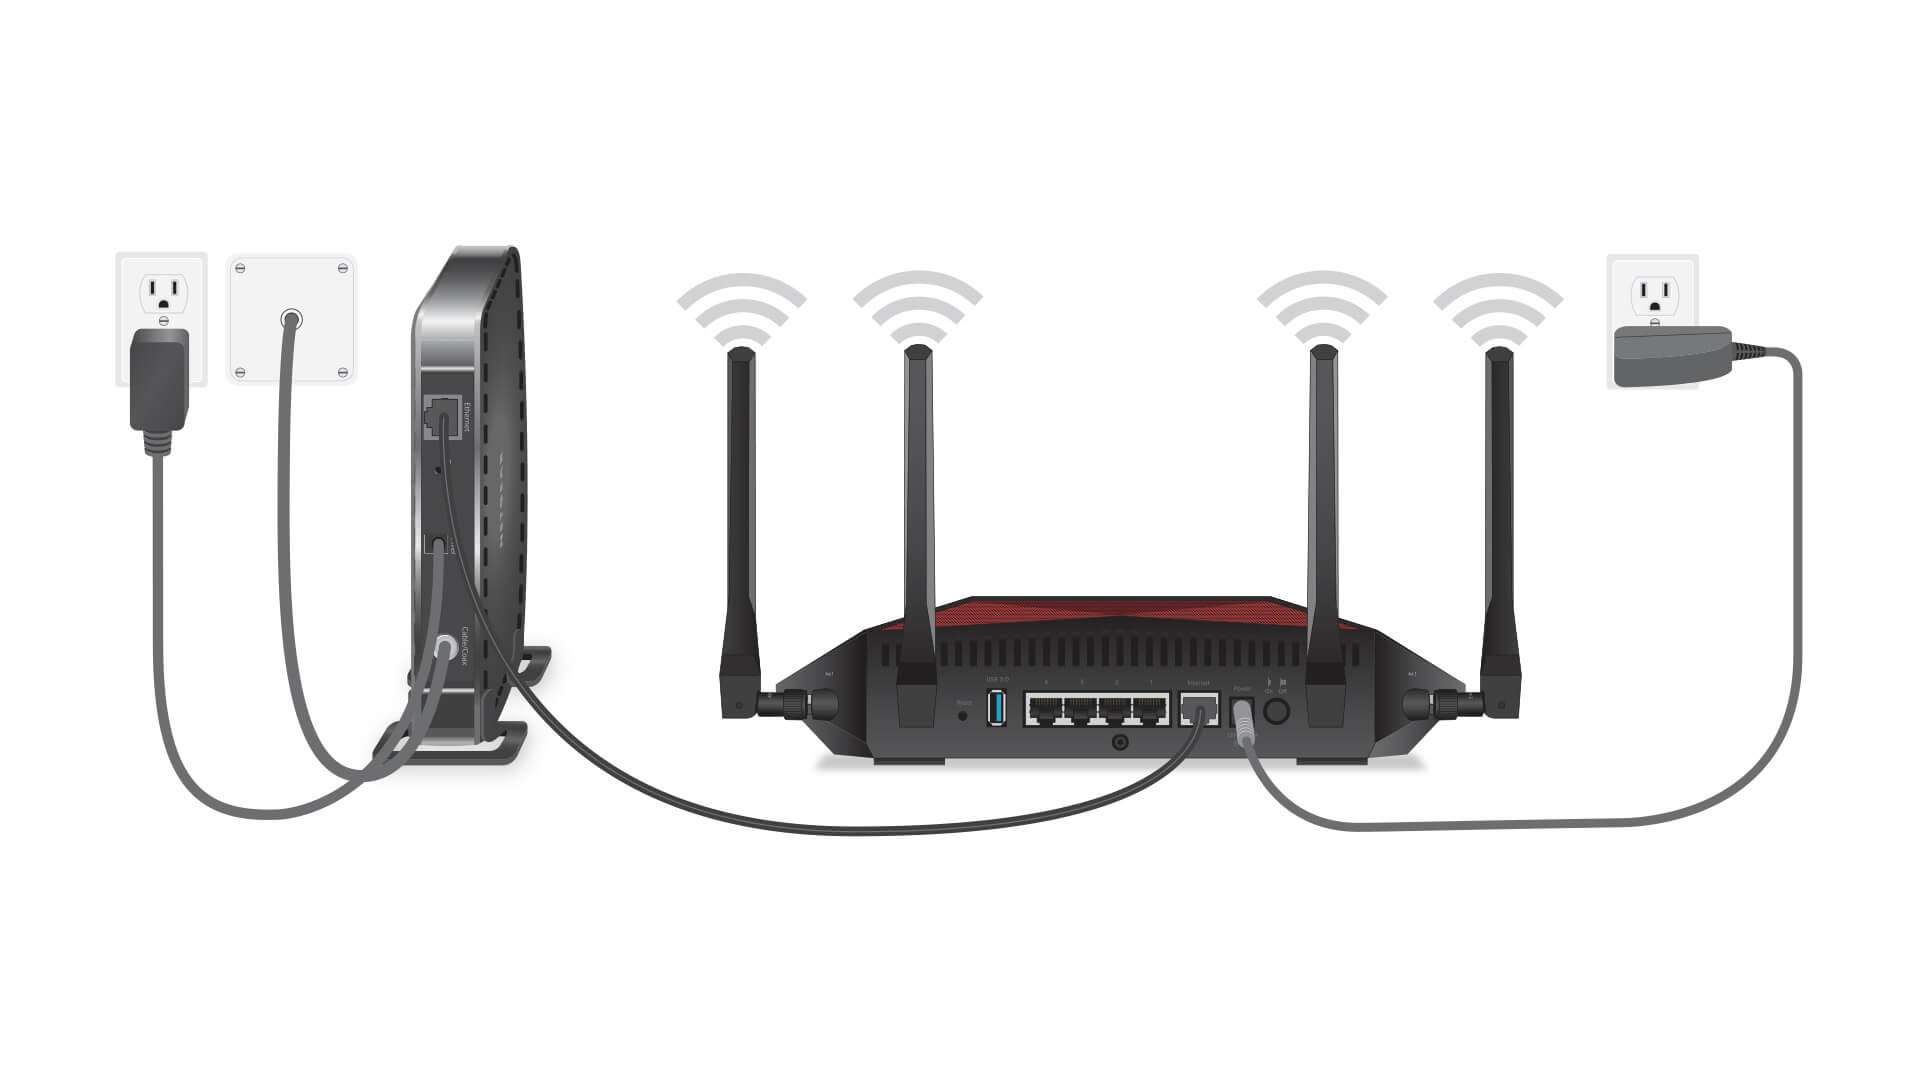 How To Set Up Your WiFi Router For Gaming